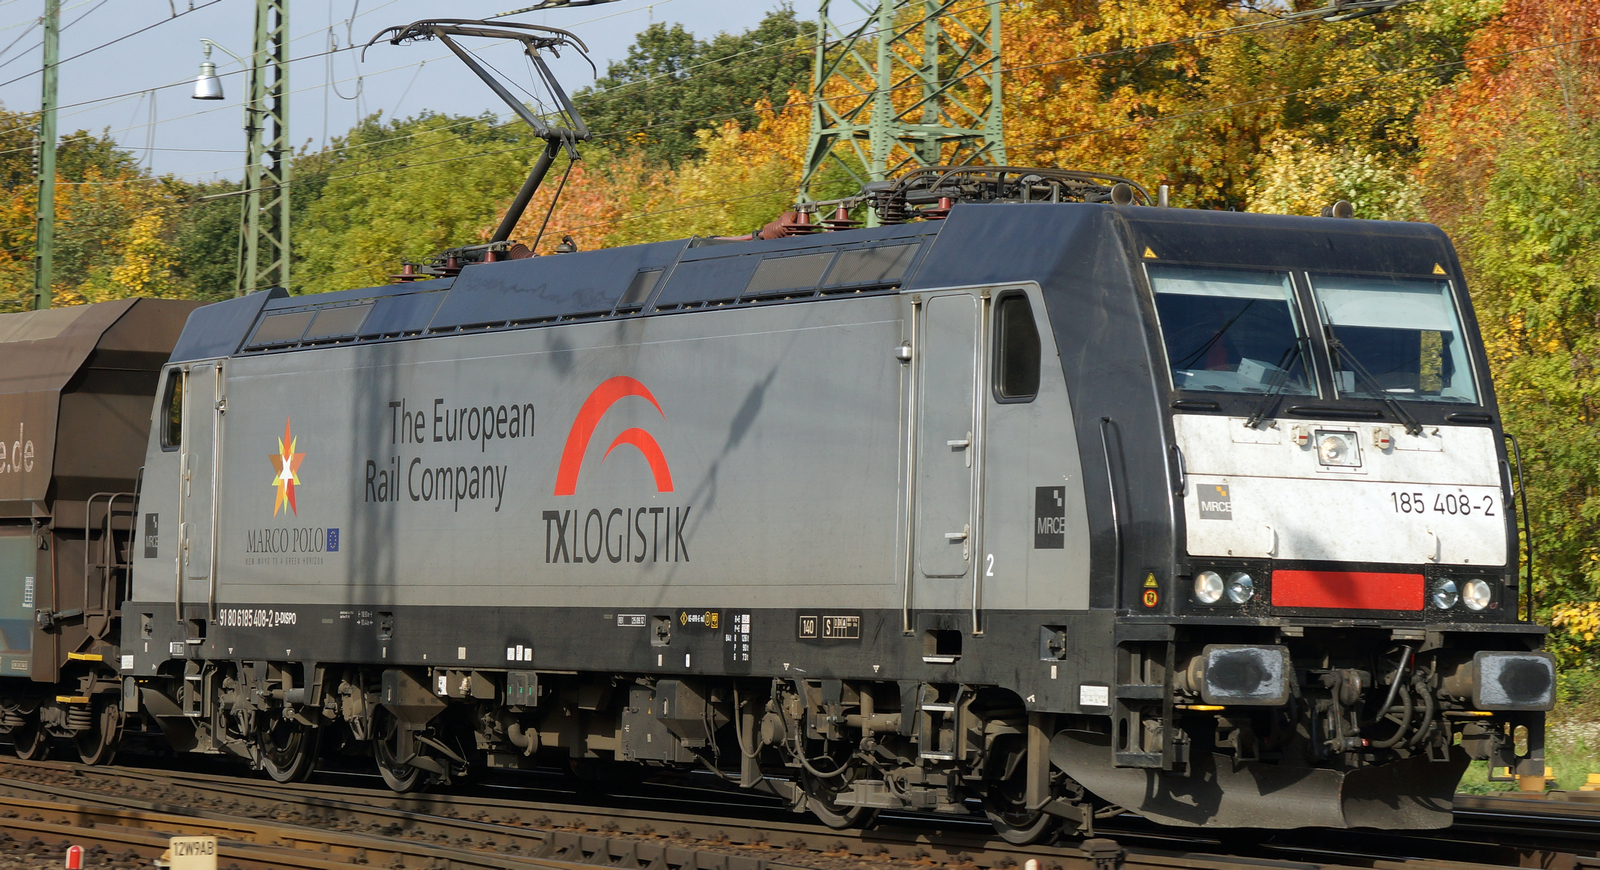 Dispolok 185 408 (TRAXX F140 AC1) in service for TX Logistic in October 2005 near the Gremberg marshalling yard